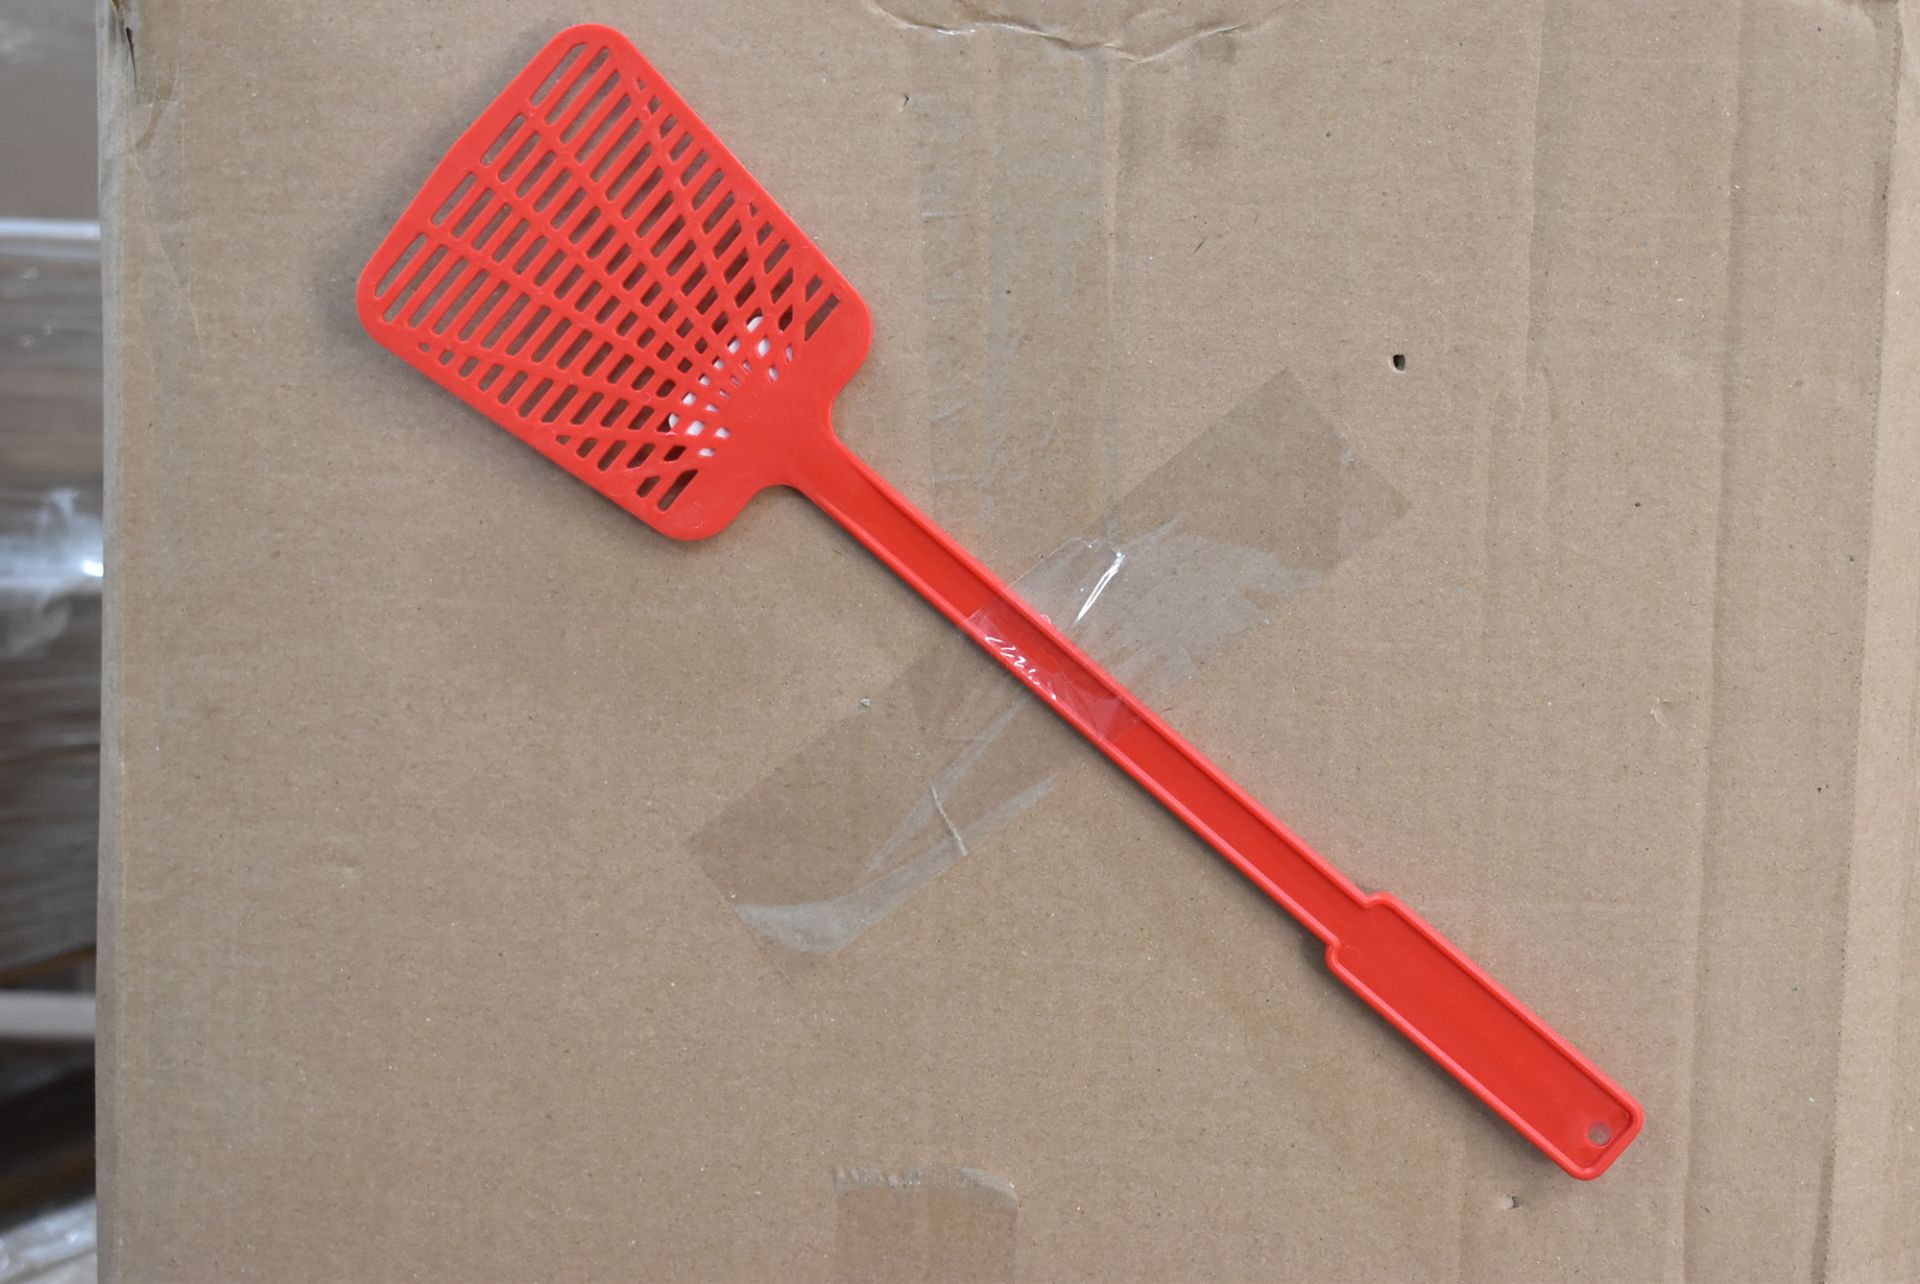 LOT/ SKID OF FINISHED GOODS - FLY SWATTERS (APPROX. 600 PCS) - Image 2 of 2